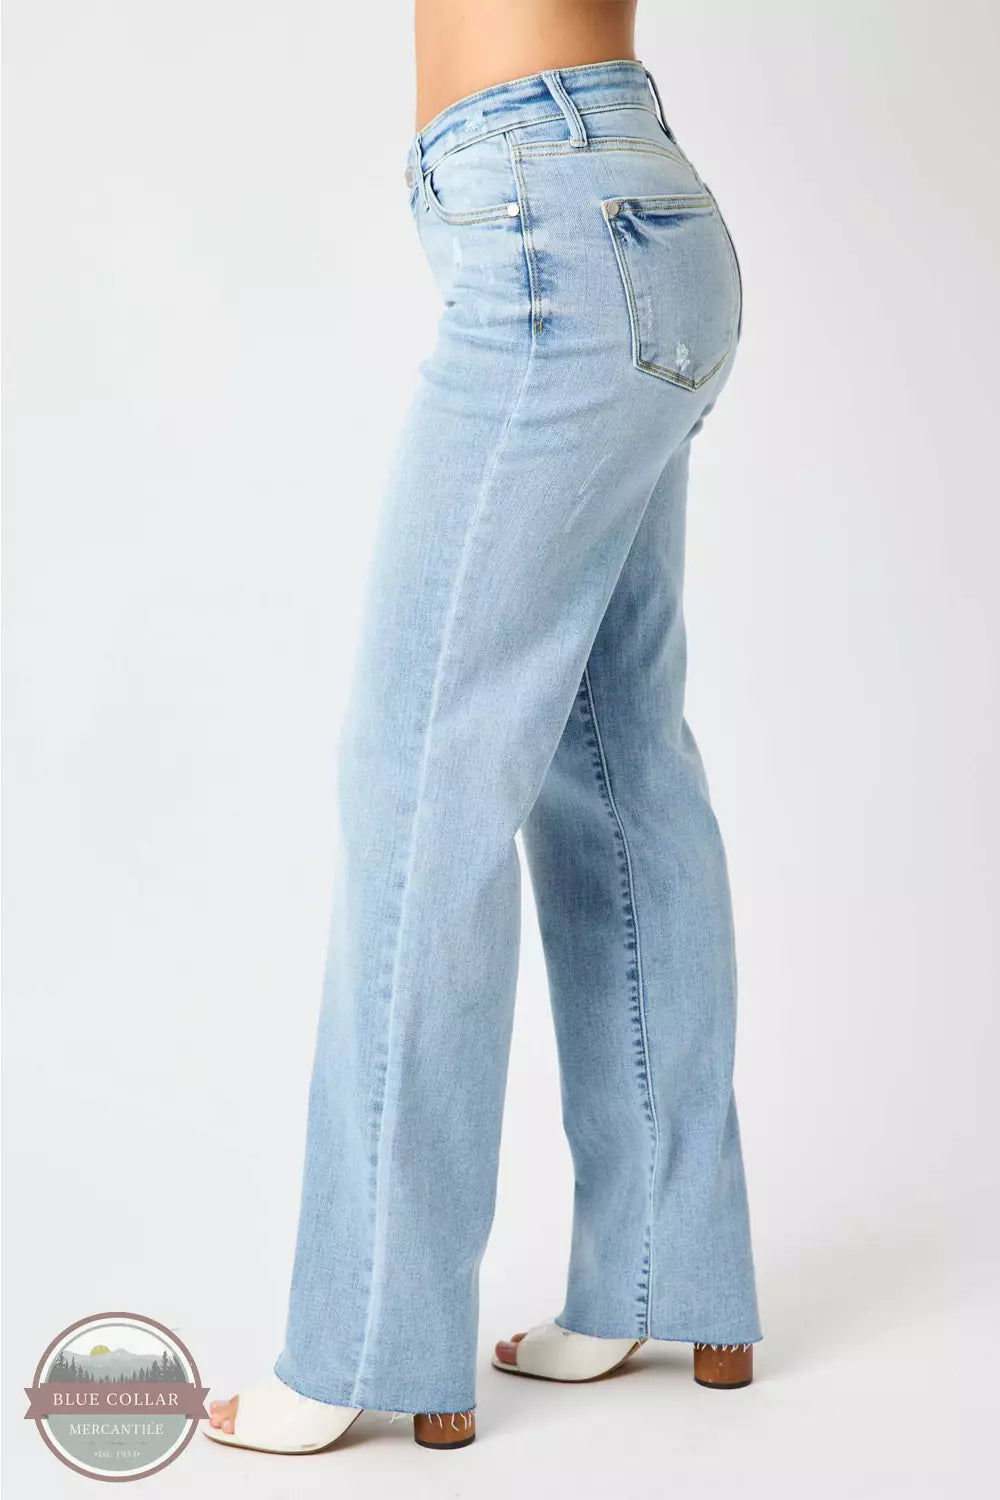 Judy Blue 82483REG High Waist V Front Waistband Straight Fit Jeans in Light Side View